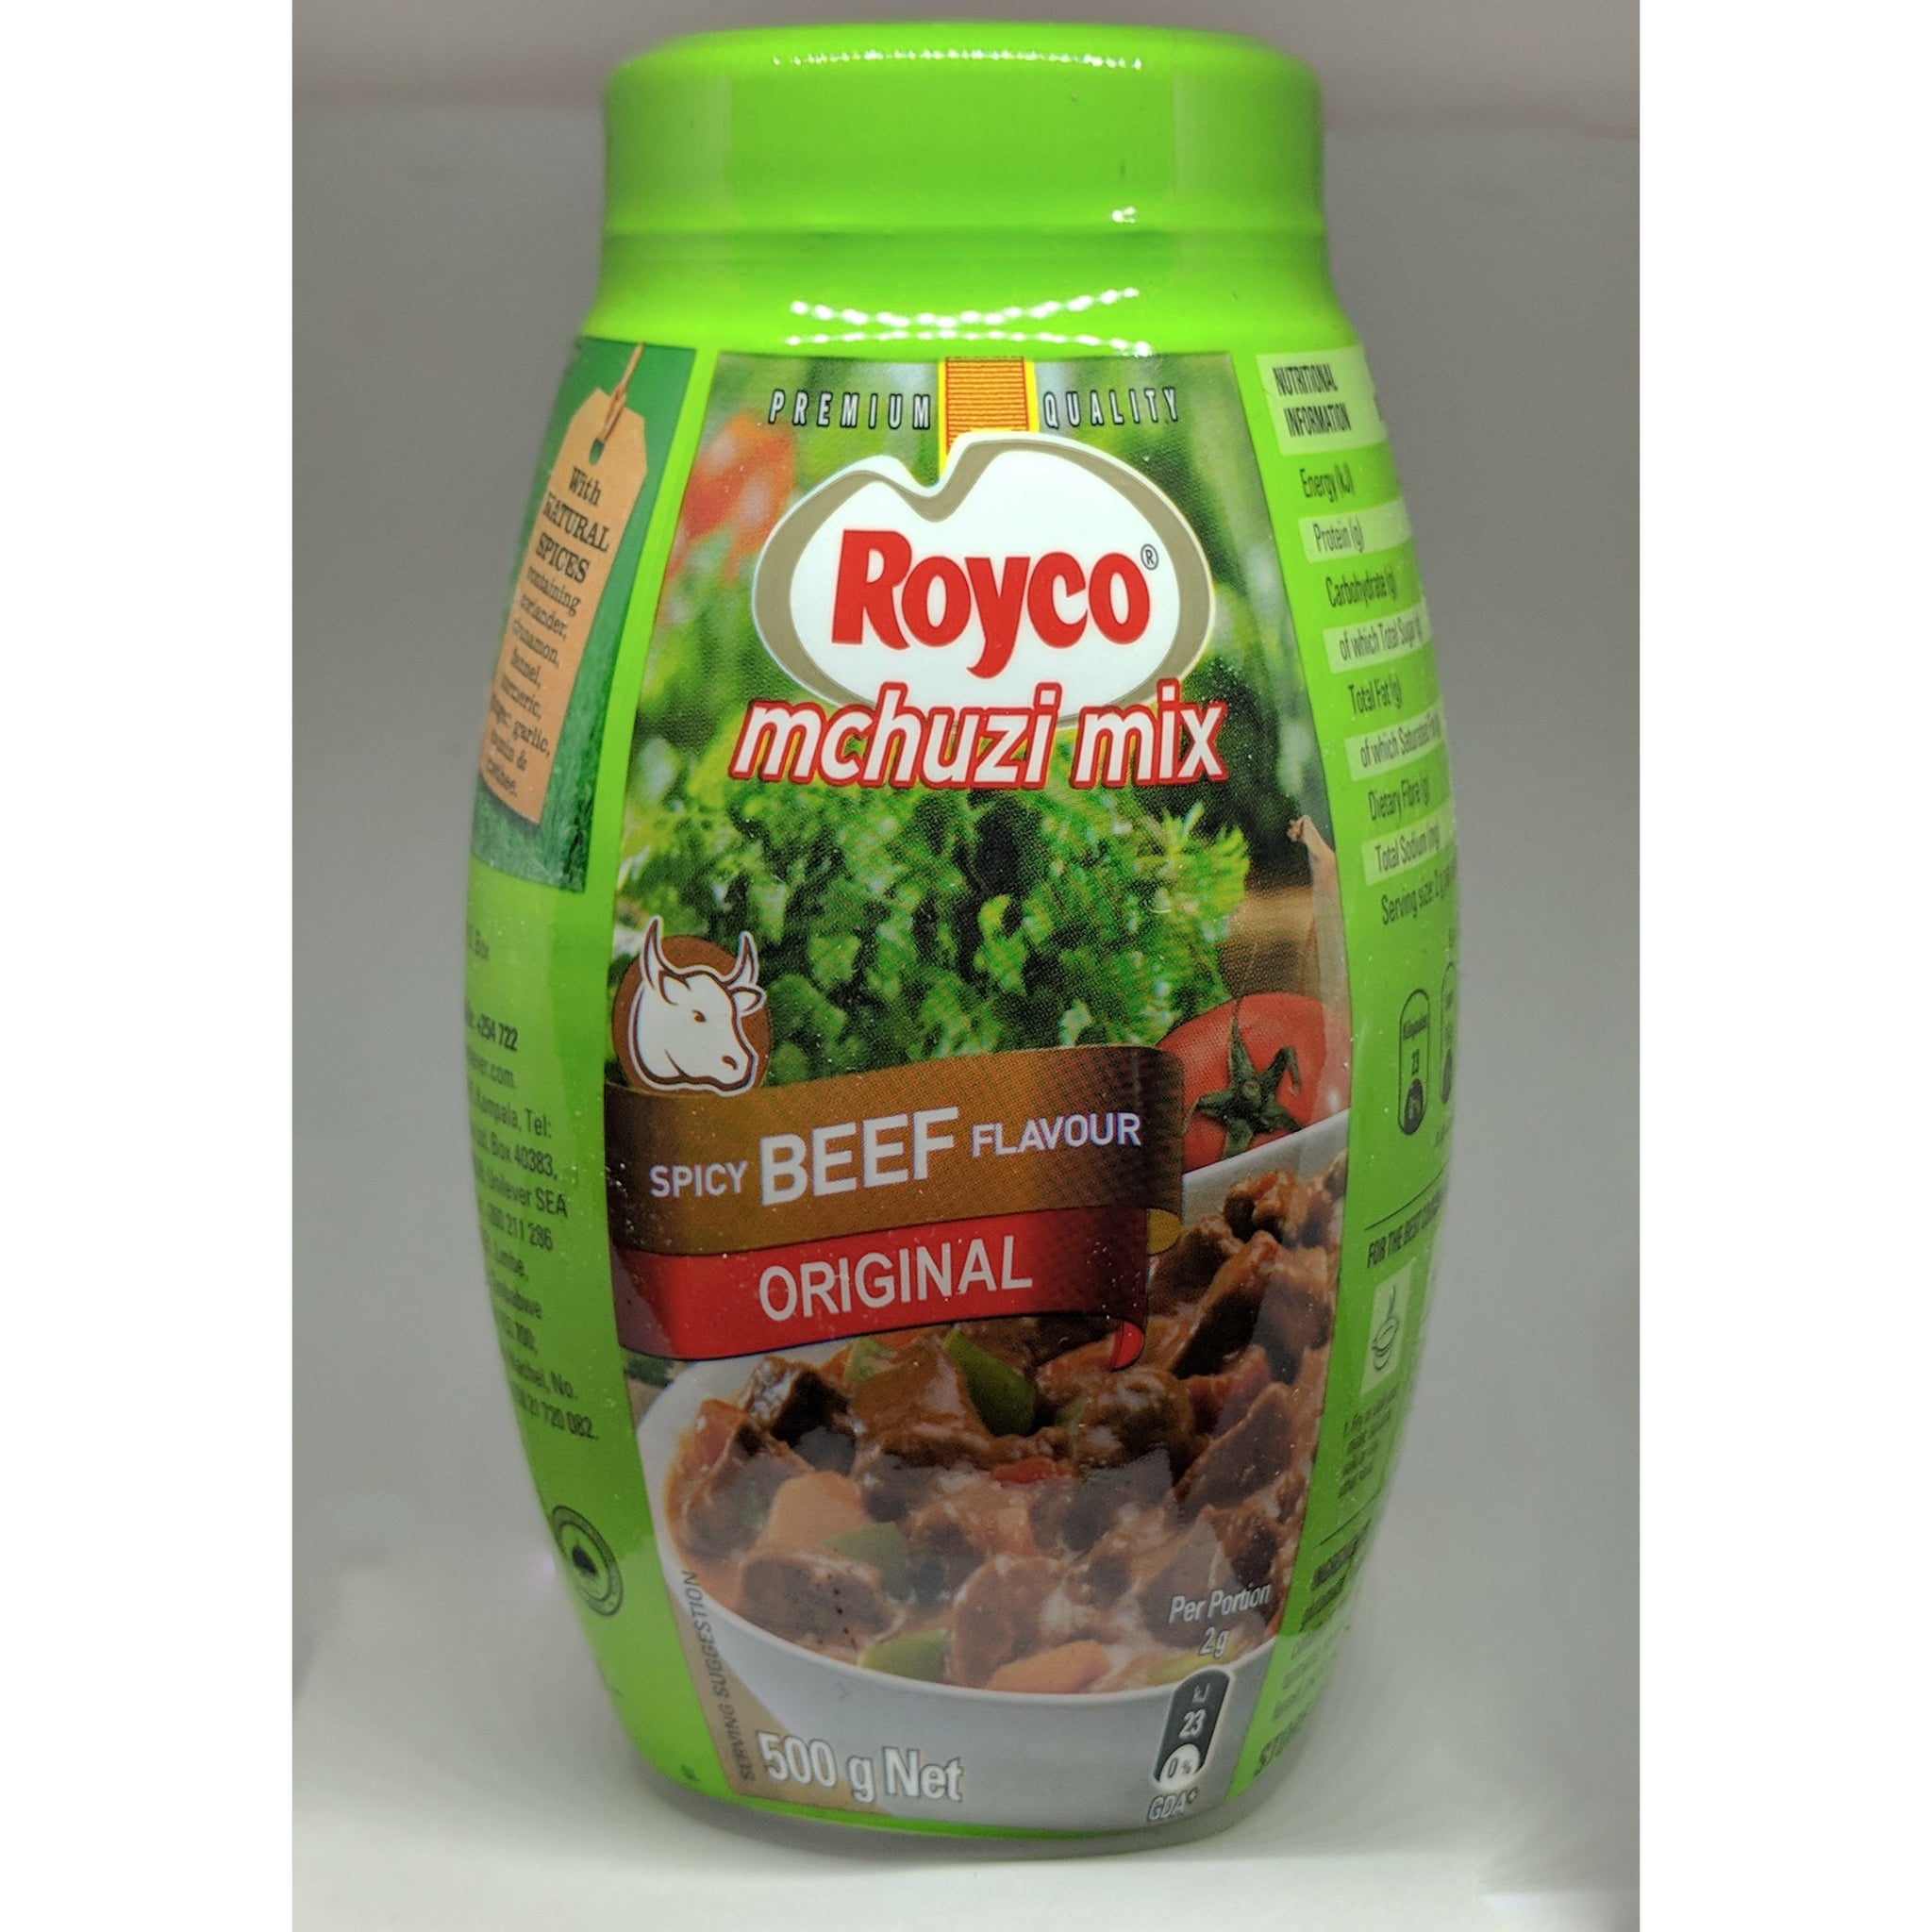 Original Royco Mchuzi Mix Beef Flavor Premium Product From Kenya Beef  Flavor Seasoning Beef Seasoning Makes Food Taste And Smell Better For The